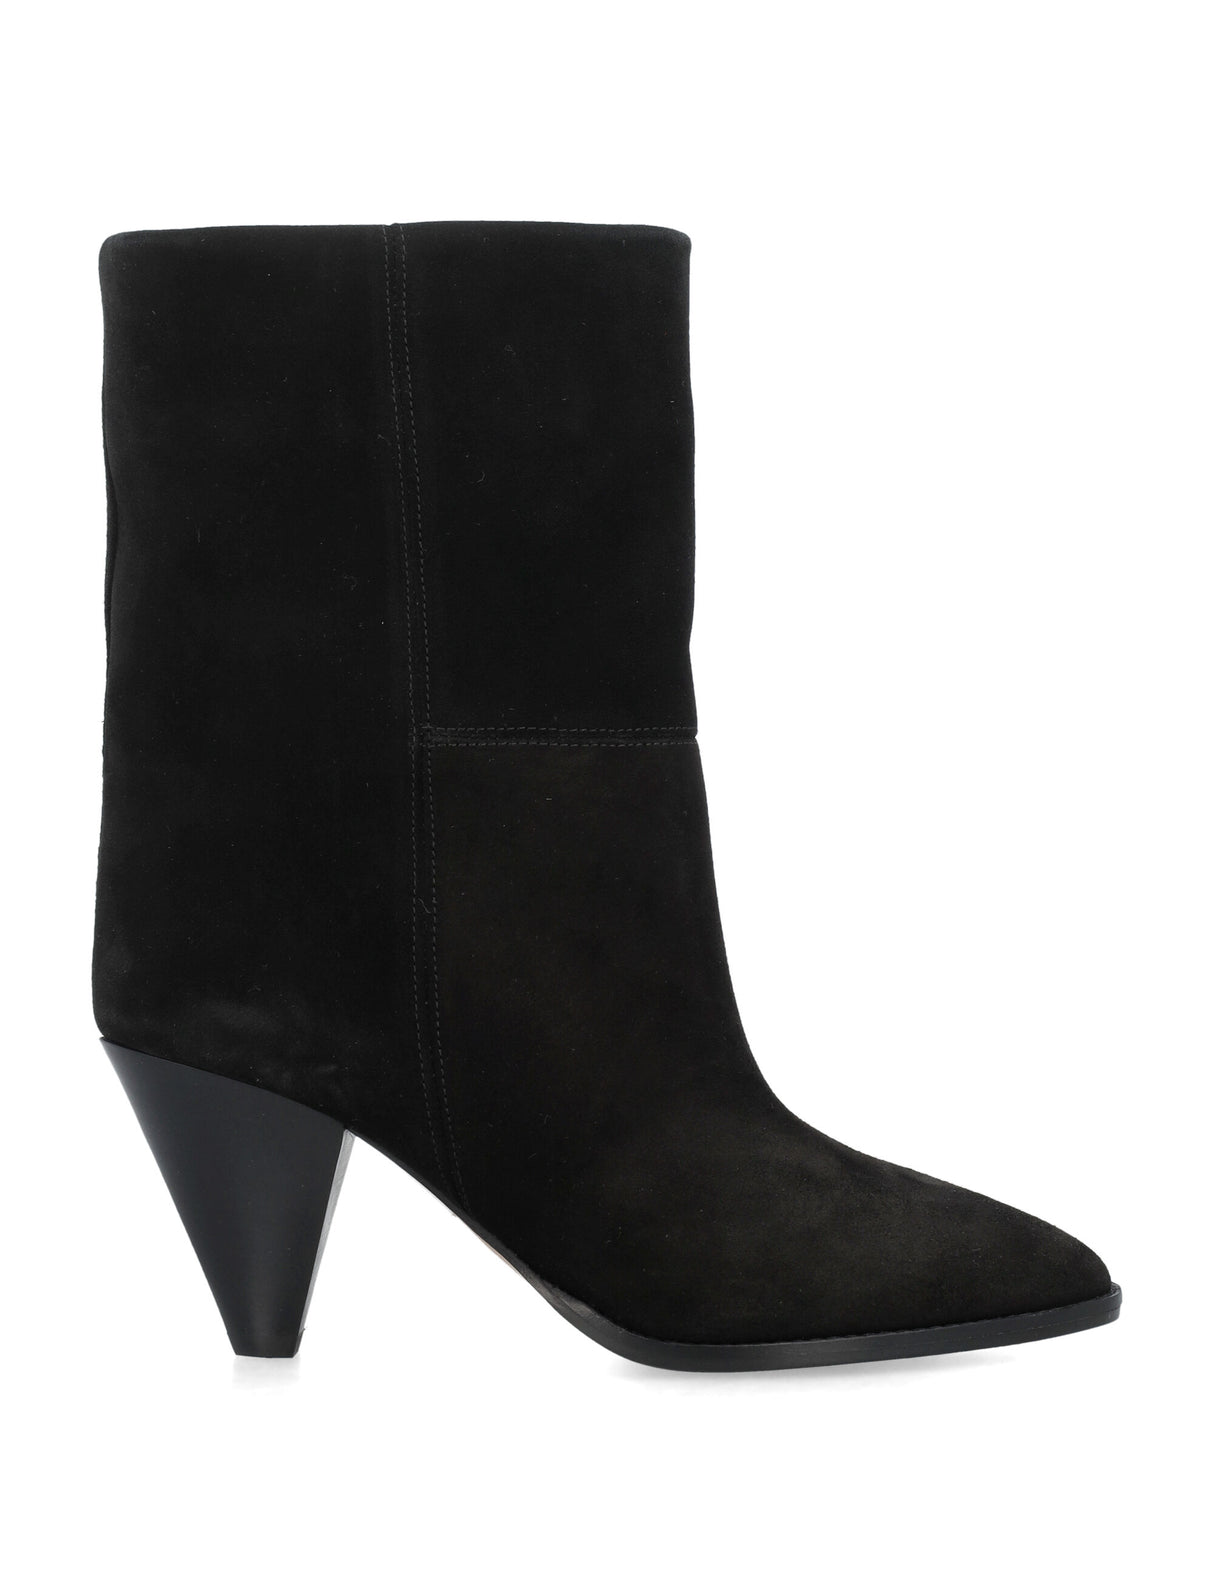 Black Suede Leather Boots for Women by a Leading Designer